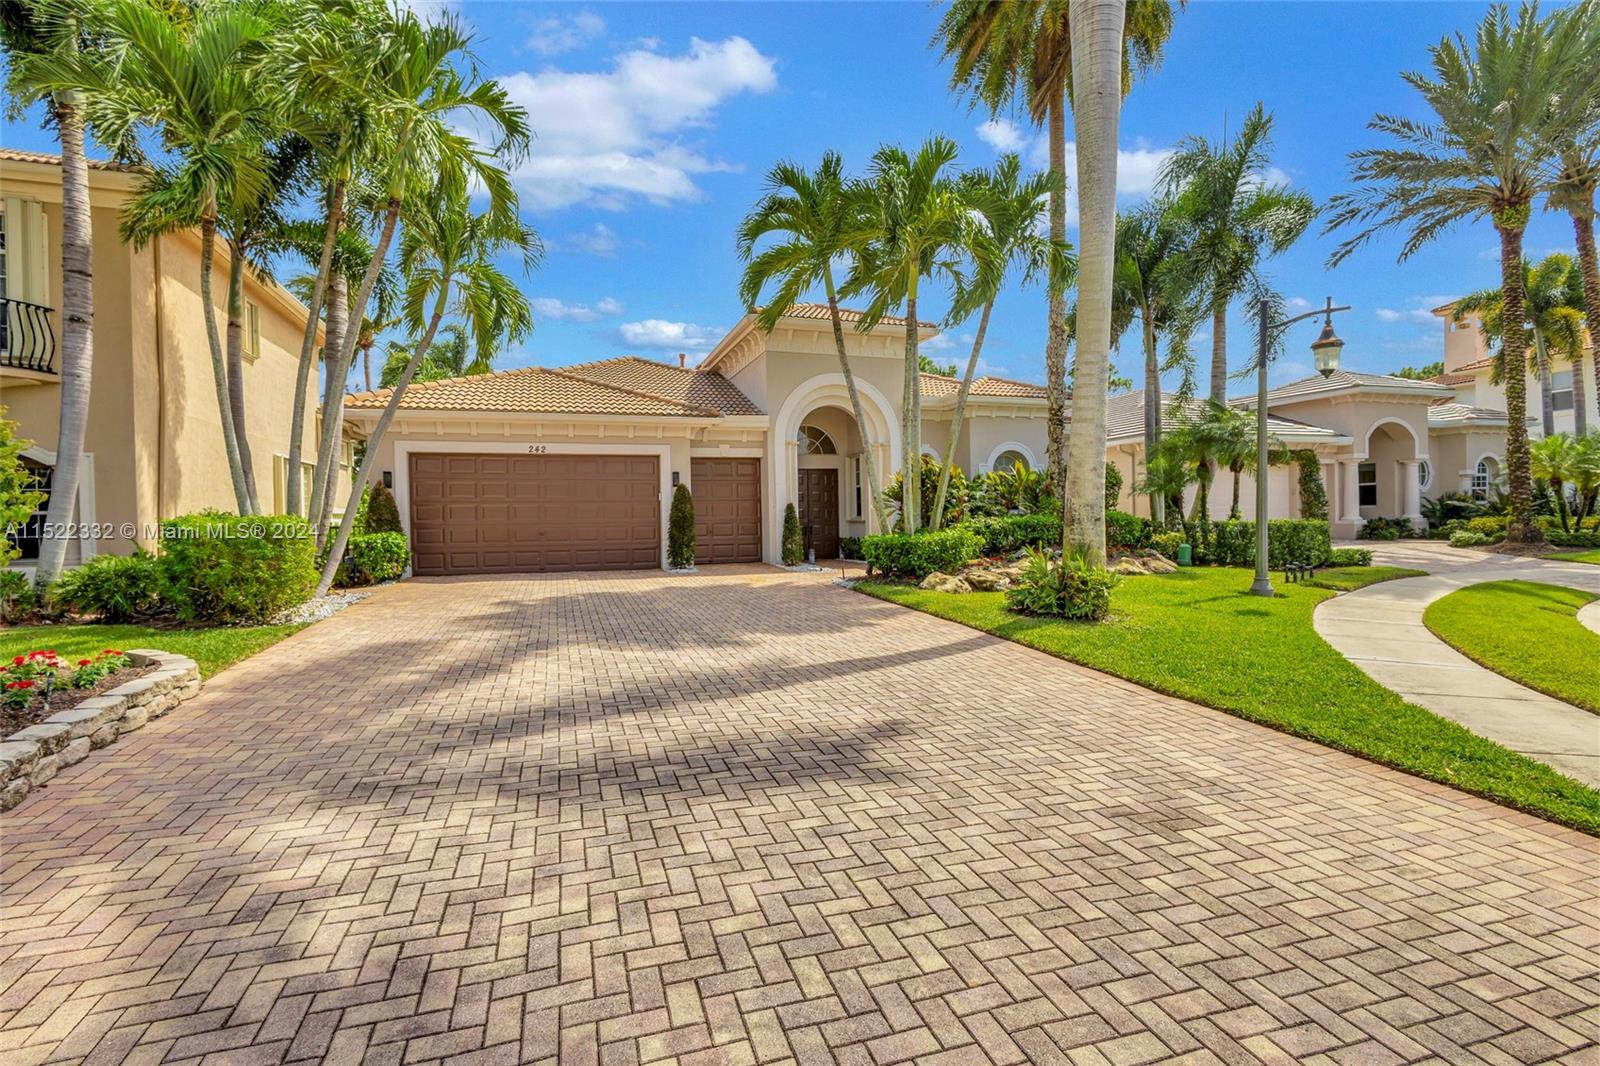 Photo of 242 Montant Dr in Palm Beach Gardens, FL